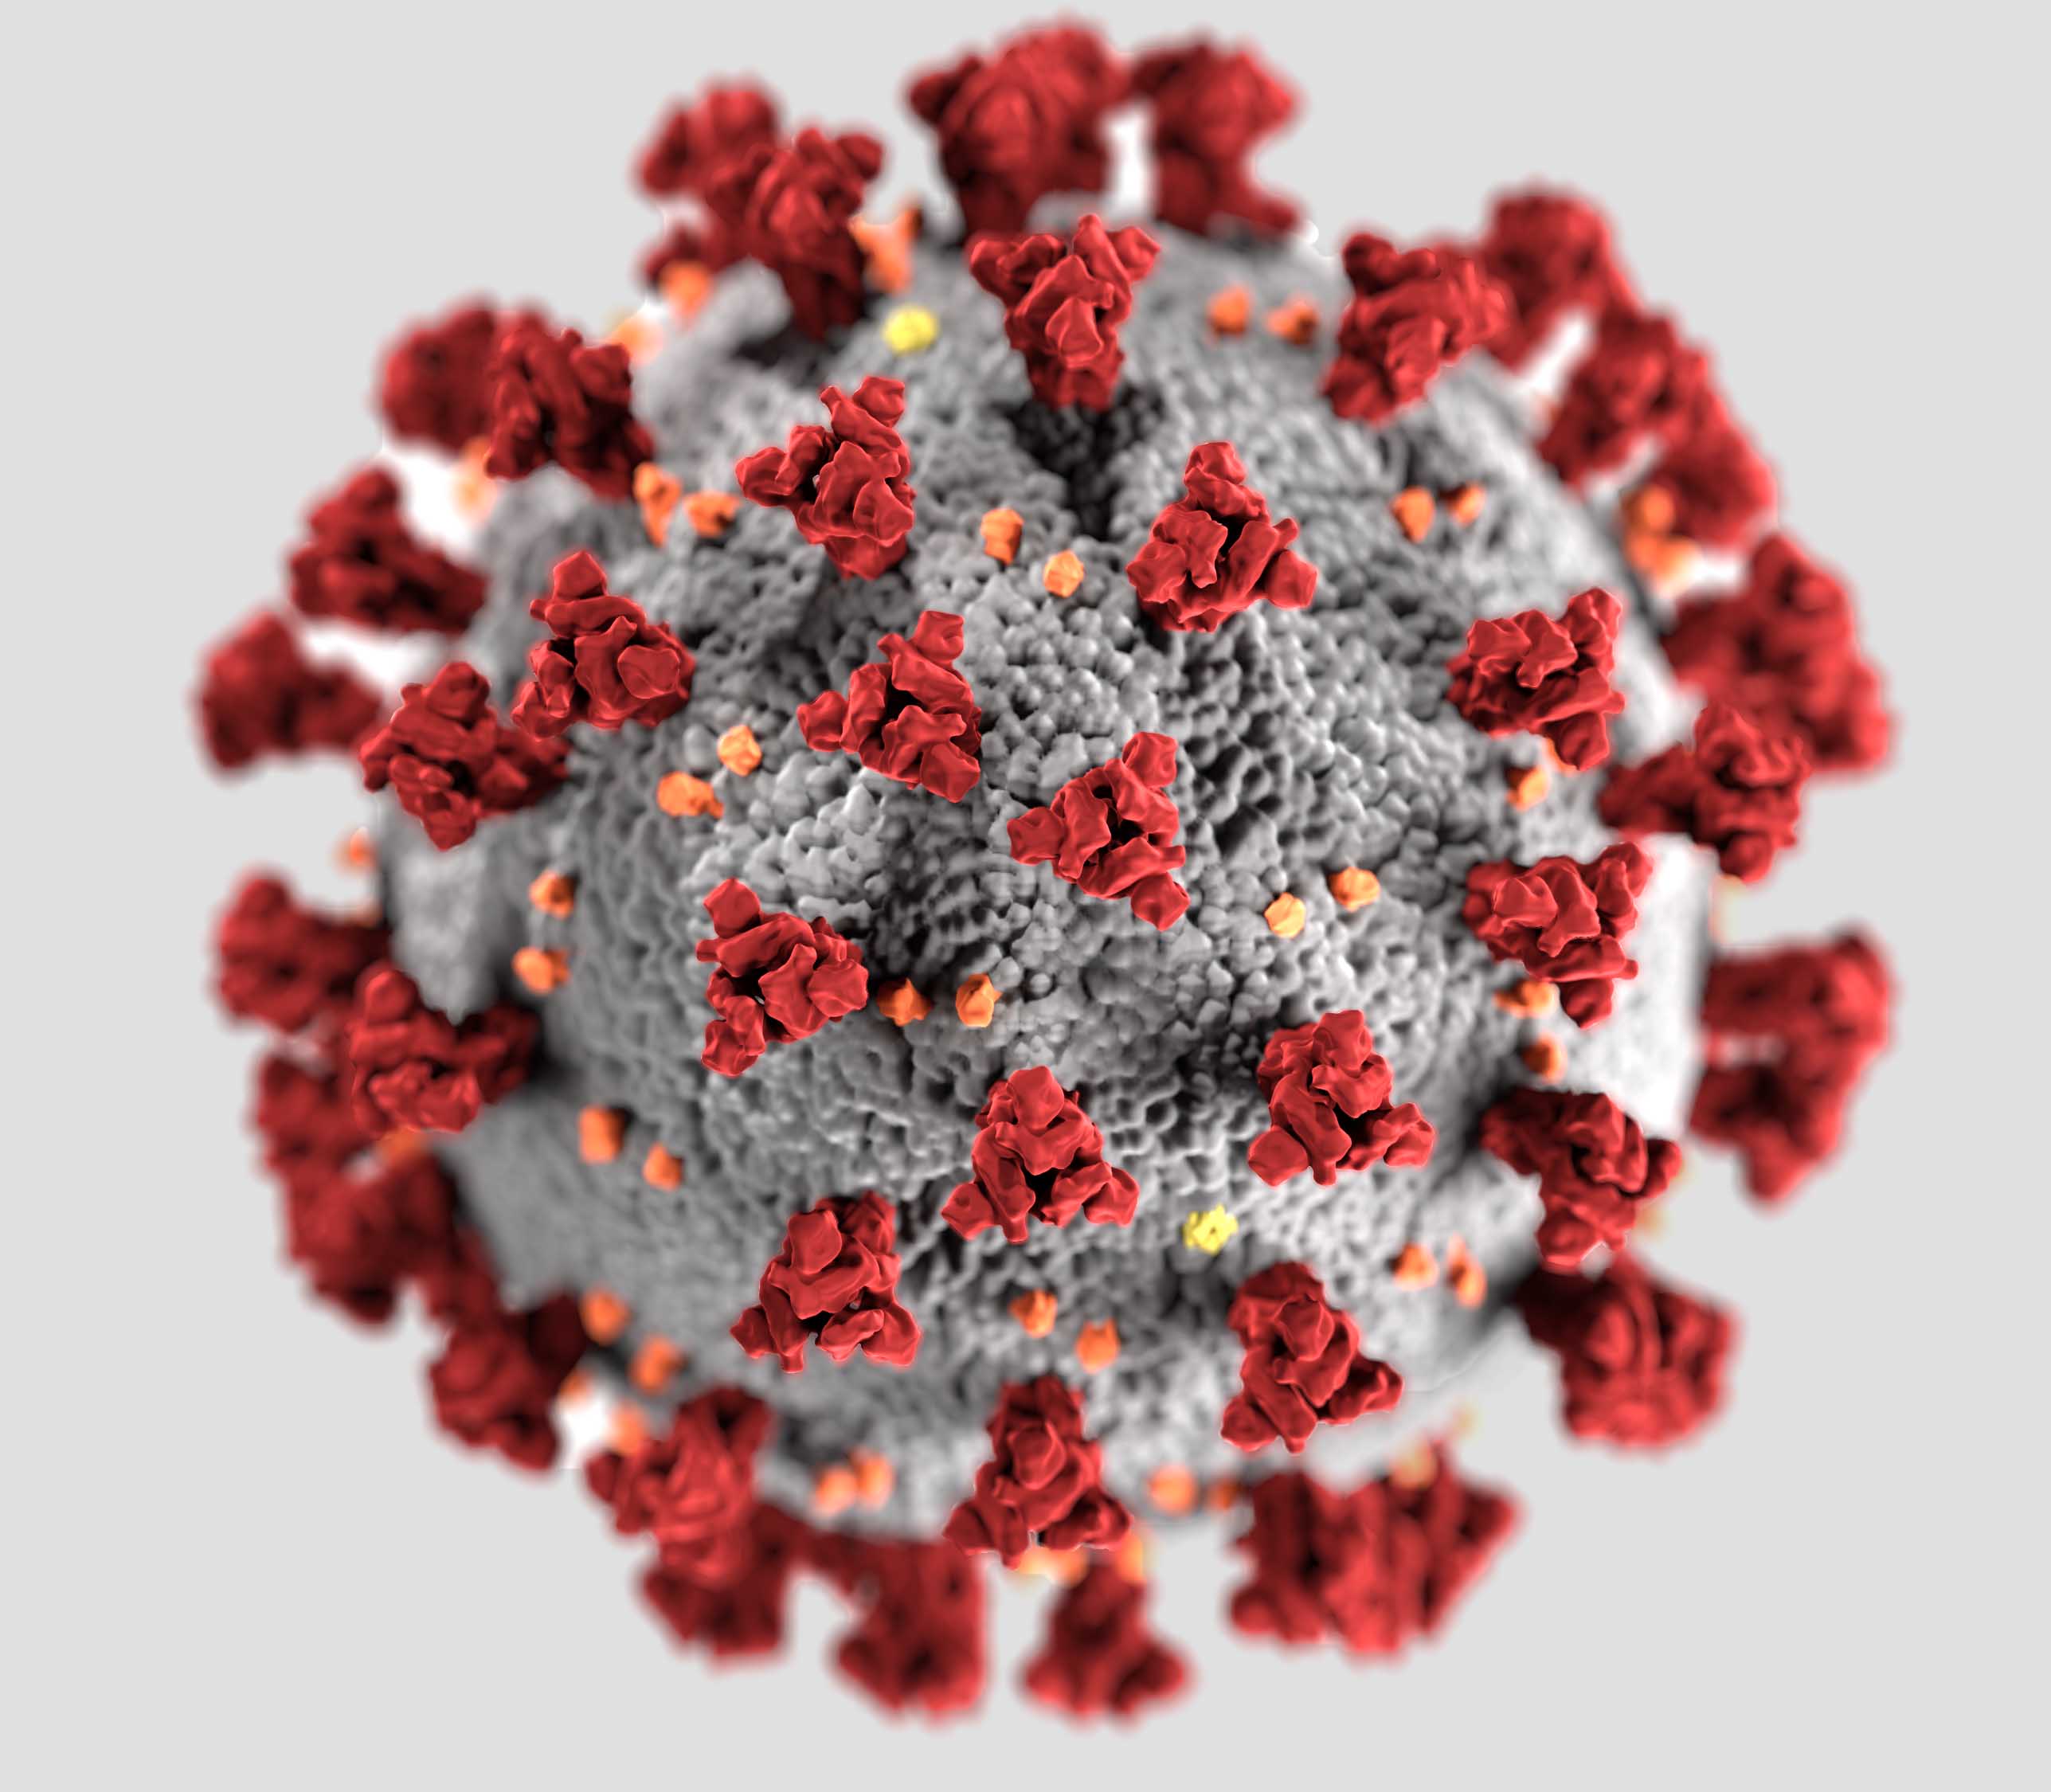 This illustration, created at the Centers for Disease Control and Prevention (CDC), reveals ultrastructural morphology exhibited by coronaviruses. Note the spikes that adorn the outer surface of the virus, which impart the look of a corona surrounding the virion, when viewed electron microscopically. A novel coronavirus, named Severe Acute Respiratory Syndrome coronavirus 2 (SARS-CoV-2), was identified as the cause of an outbreak of respiratory illness first detected in Wuhan, China in 2019. The illness cau